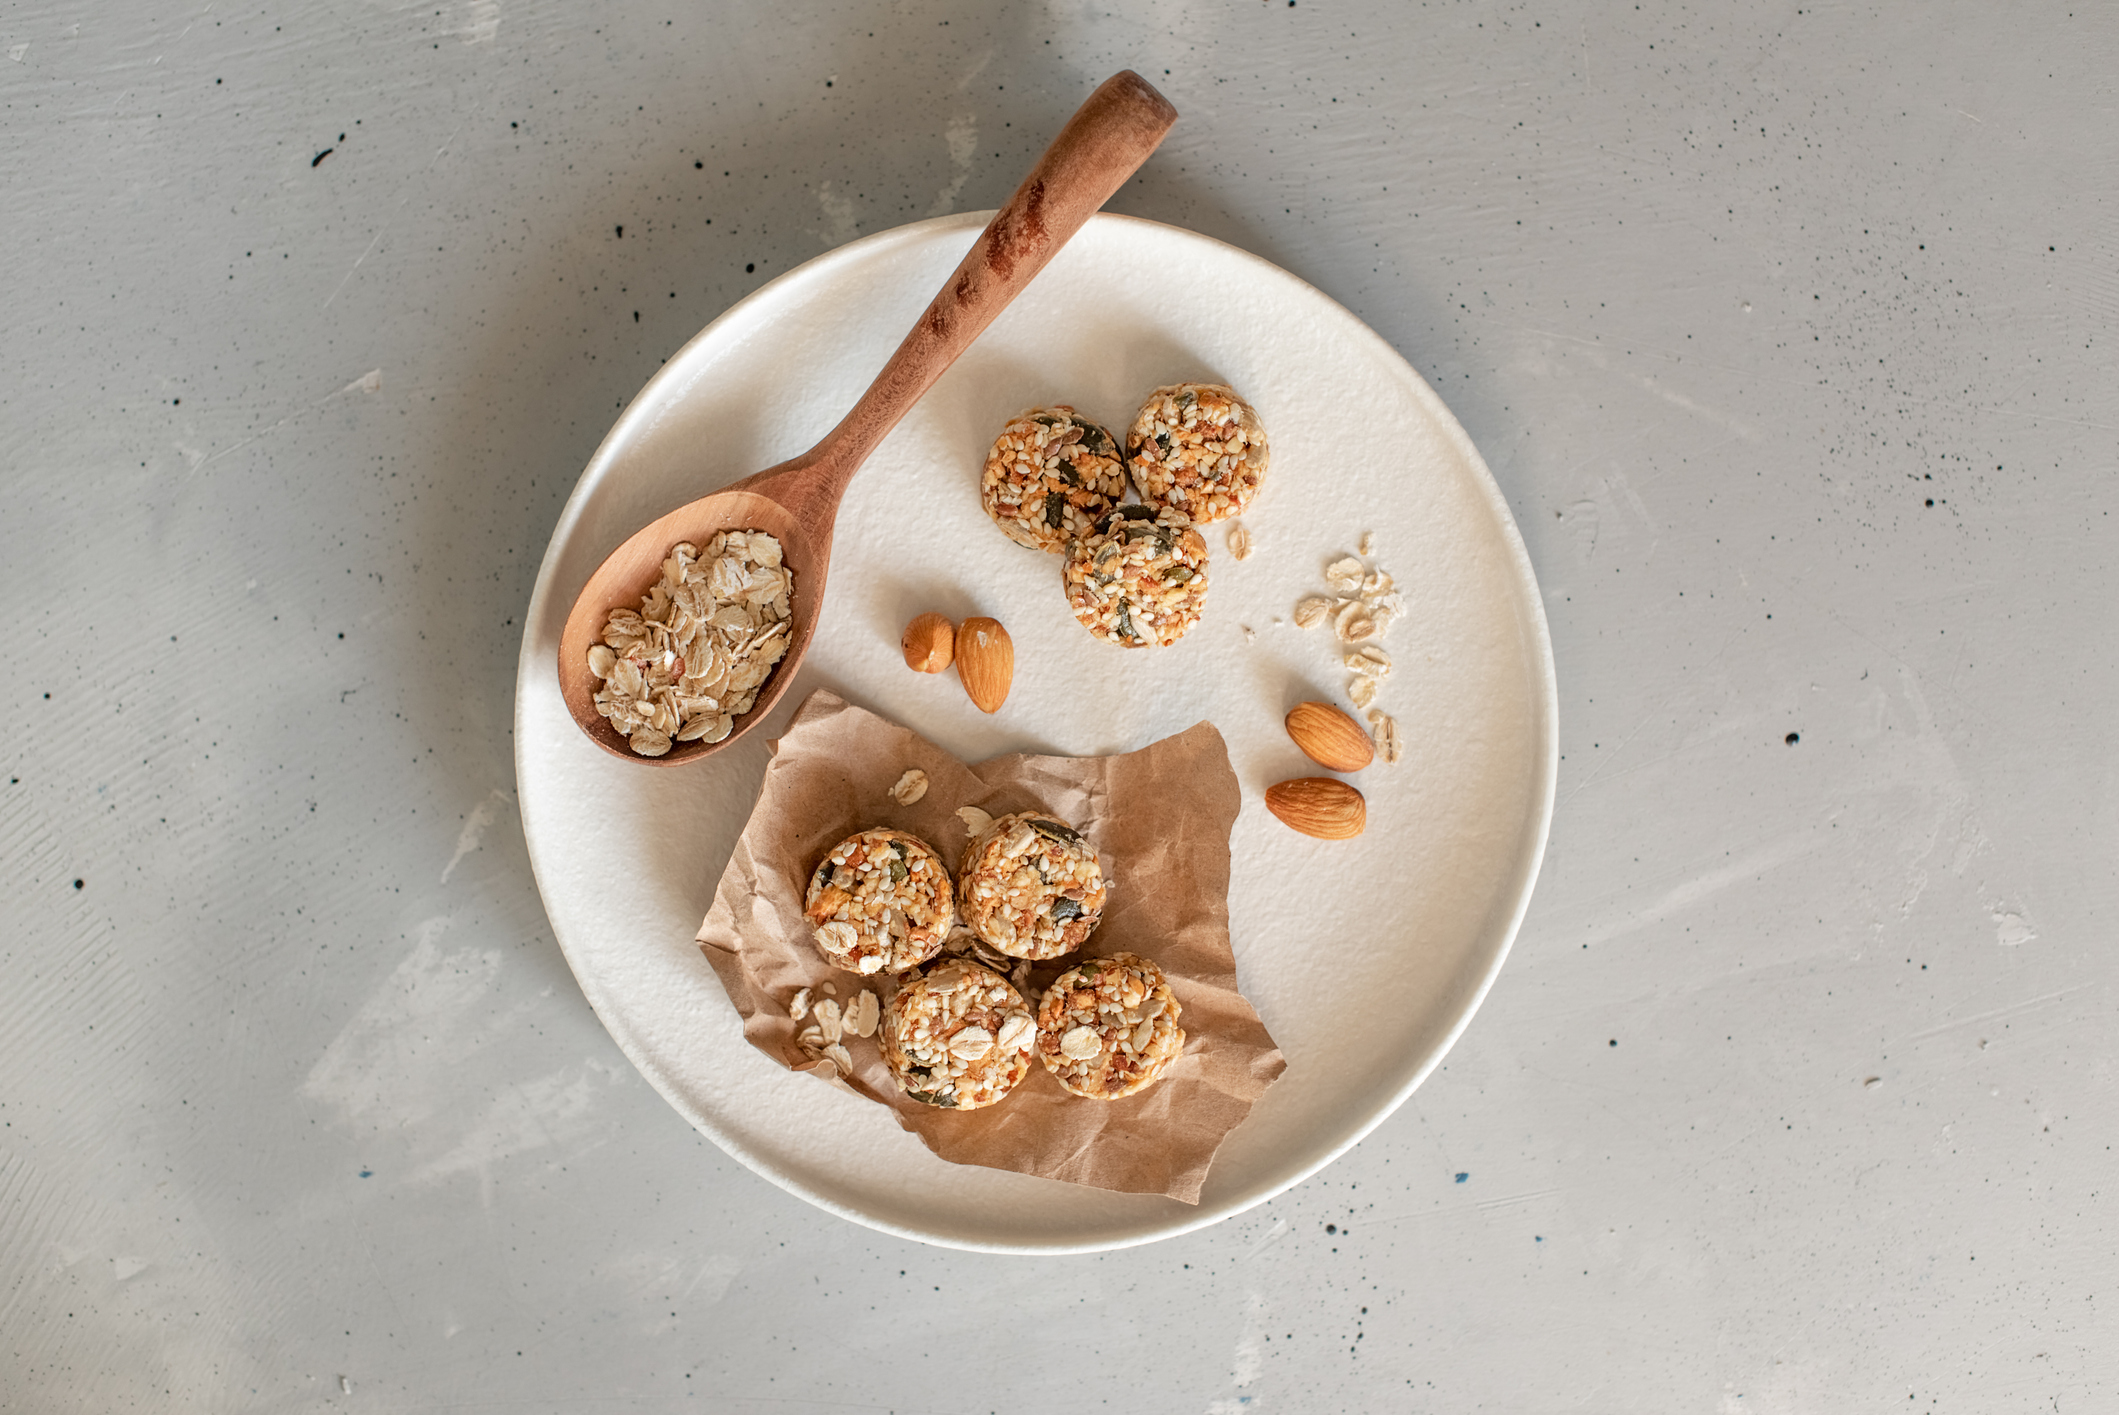 Lactation cookies with Pro You Pea or Whey Protein Powder, brewers yeast, nuts and seeds.